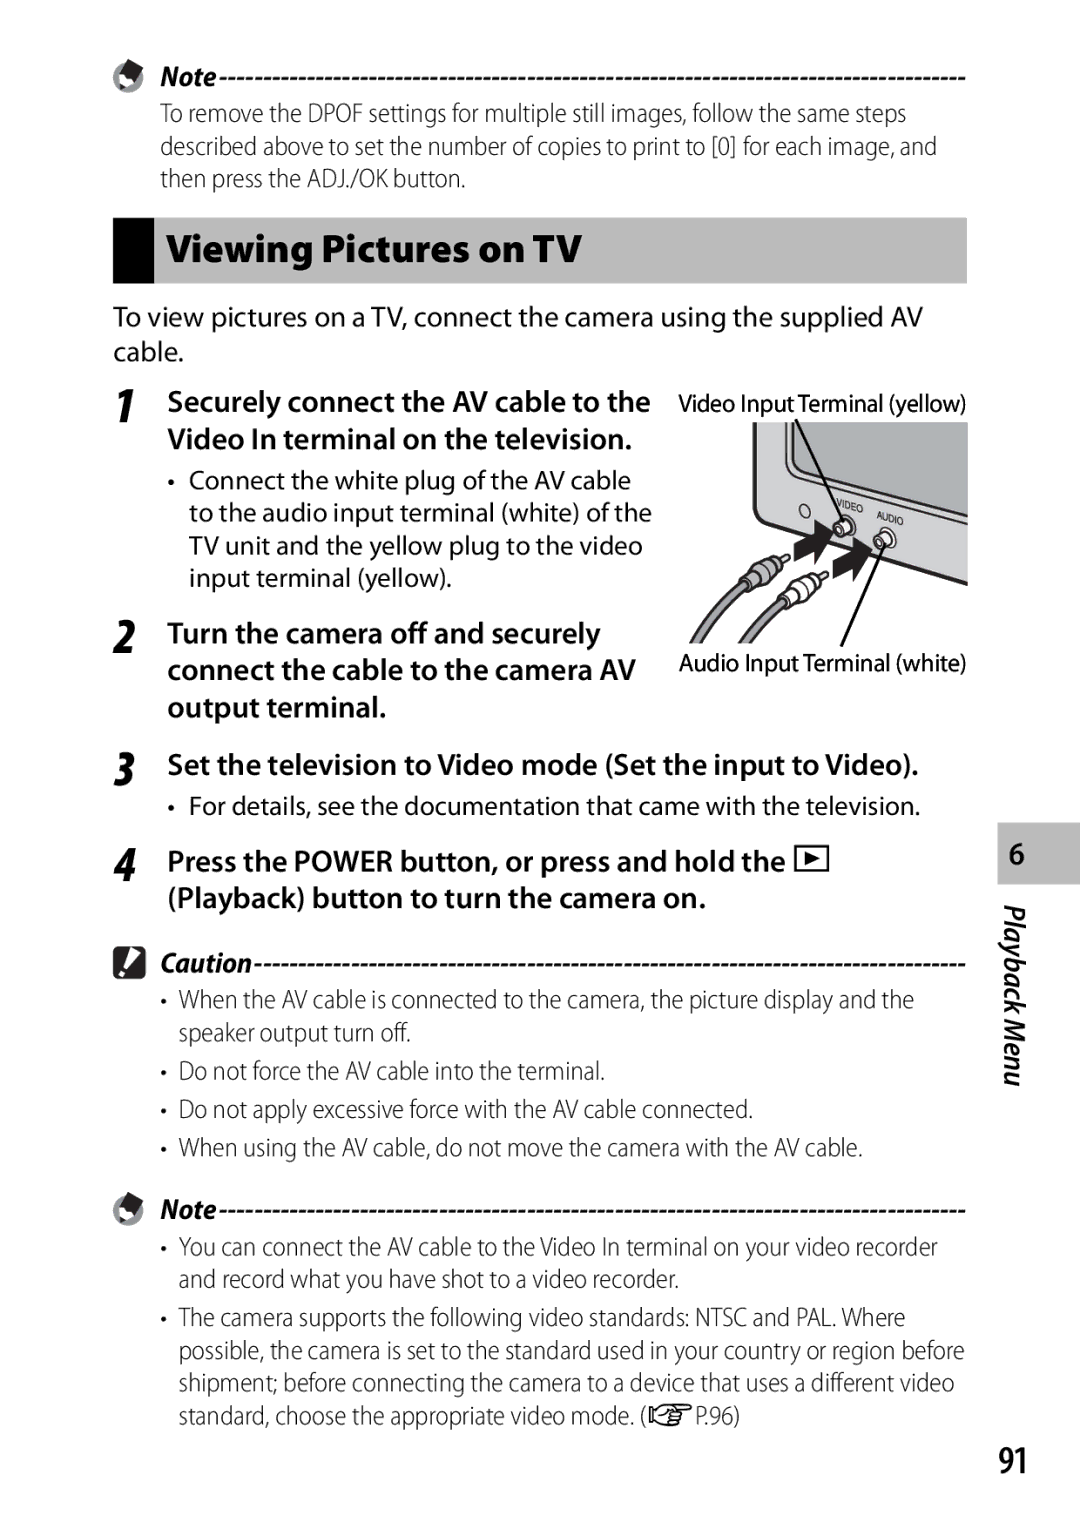 Ricoh CX3 manual Viewing Pictures on TV, Press the Power button, or press and hold, Playback button to turn the camera on 